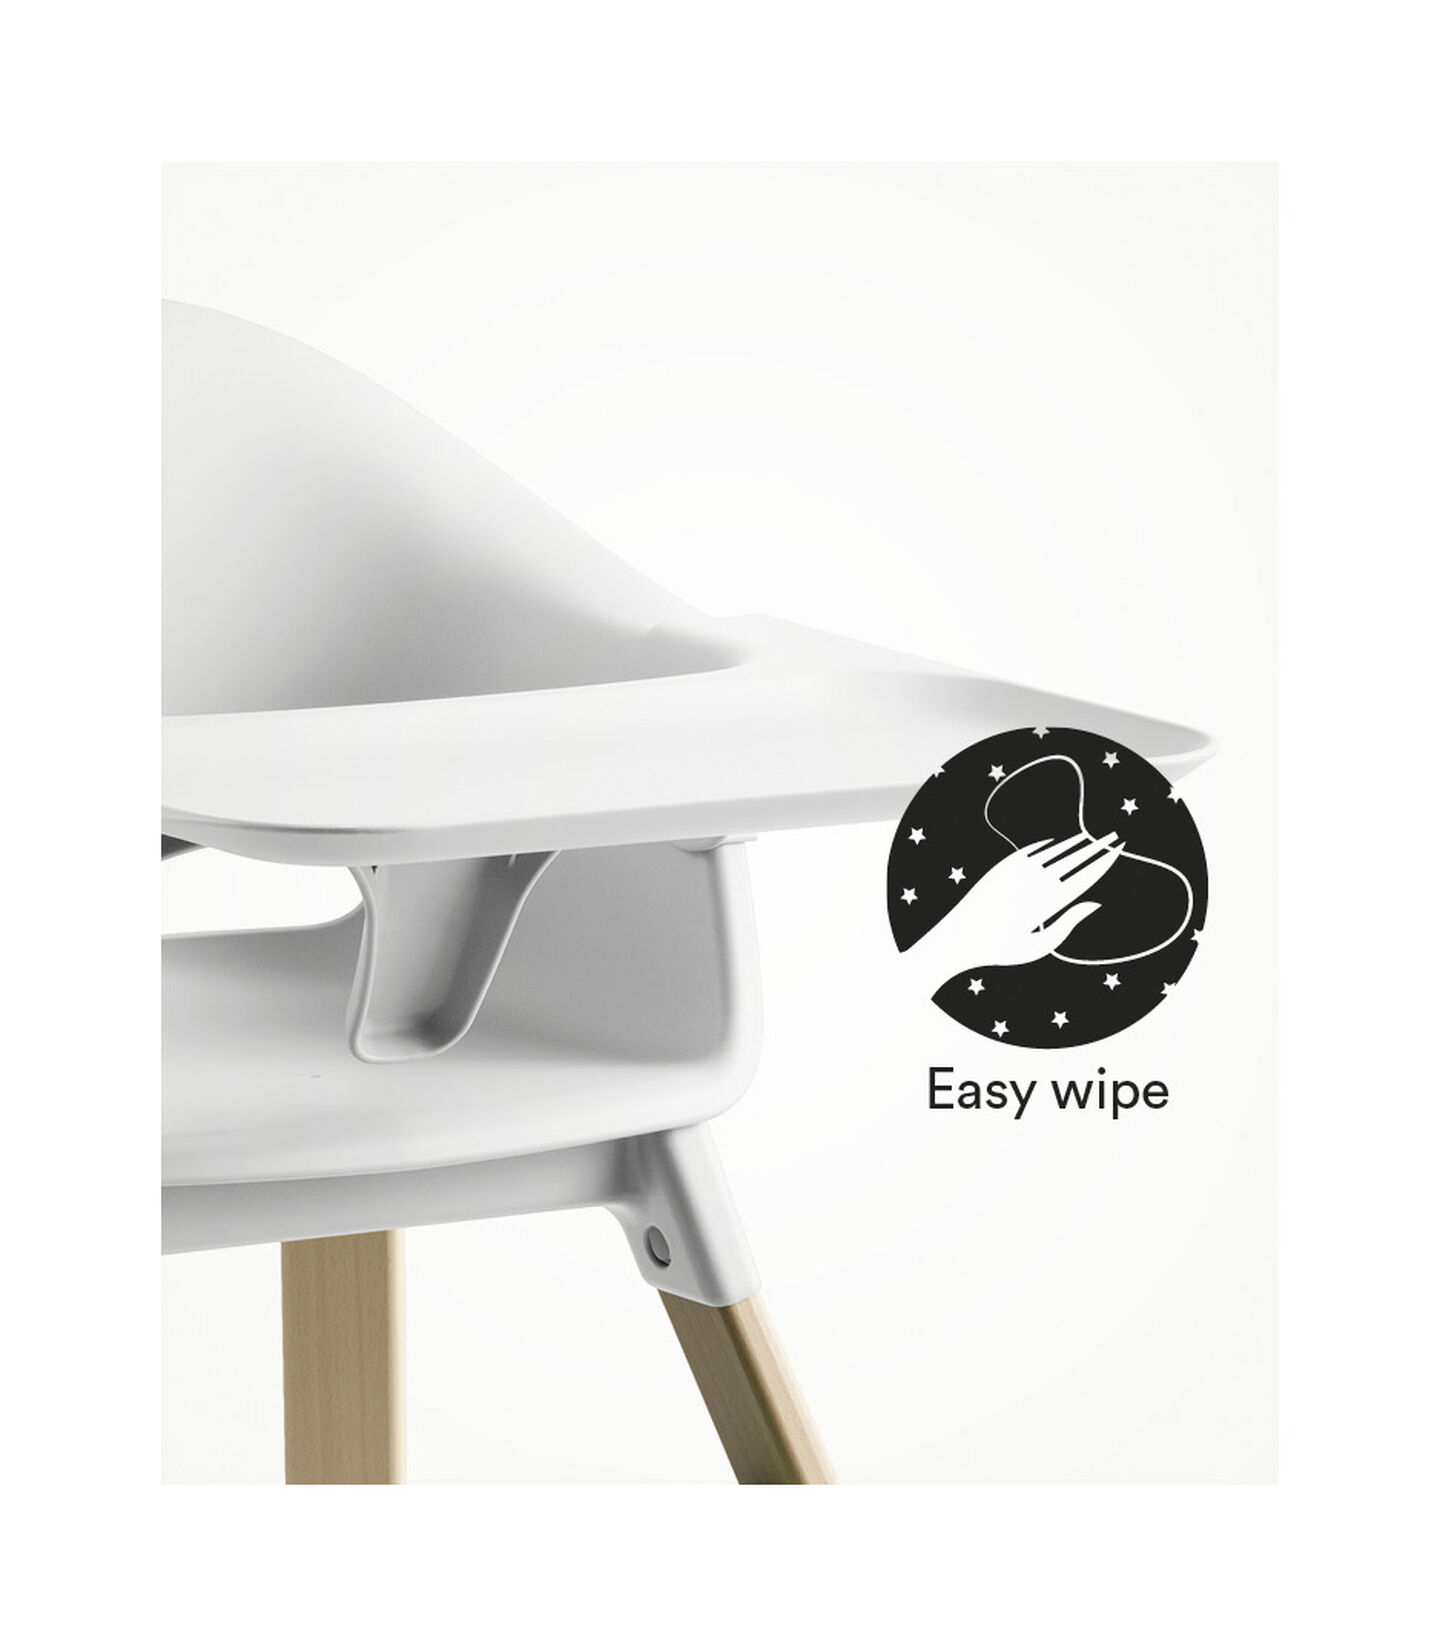 Stokke® Clikk™ High Chair with Tray, in Natural and White. Easy Wipe. view 5